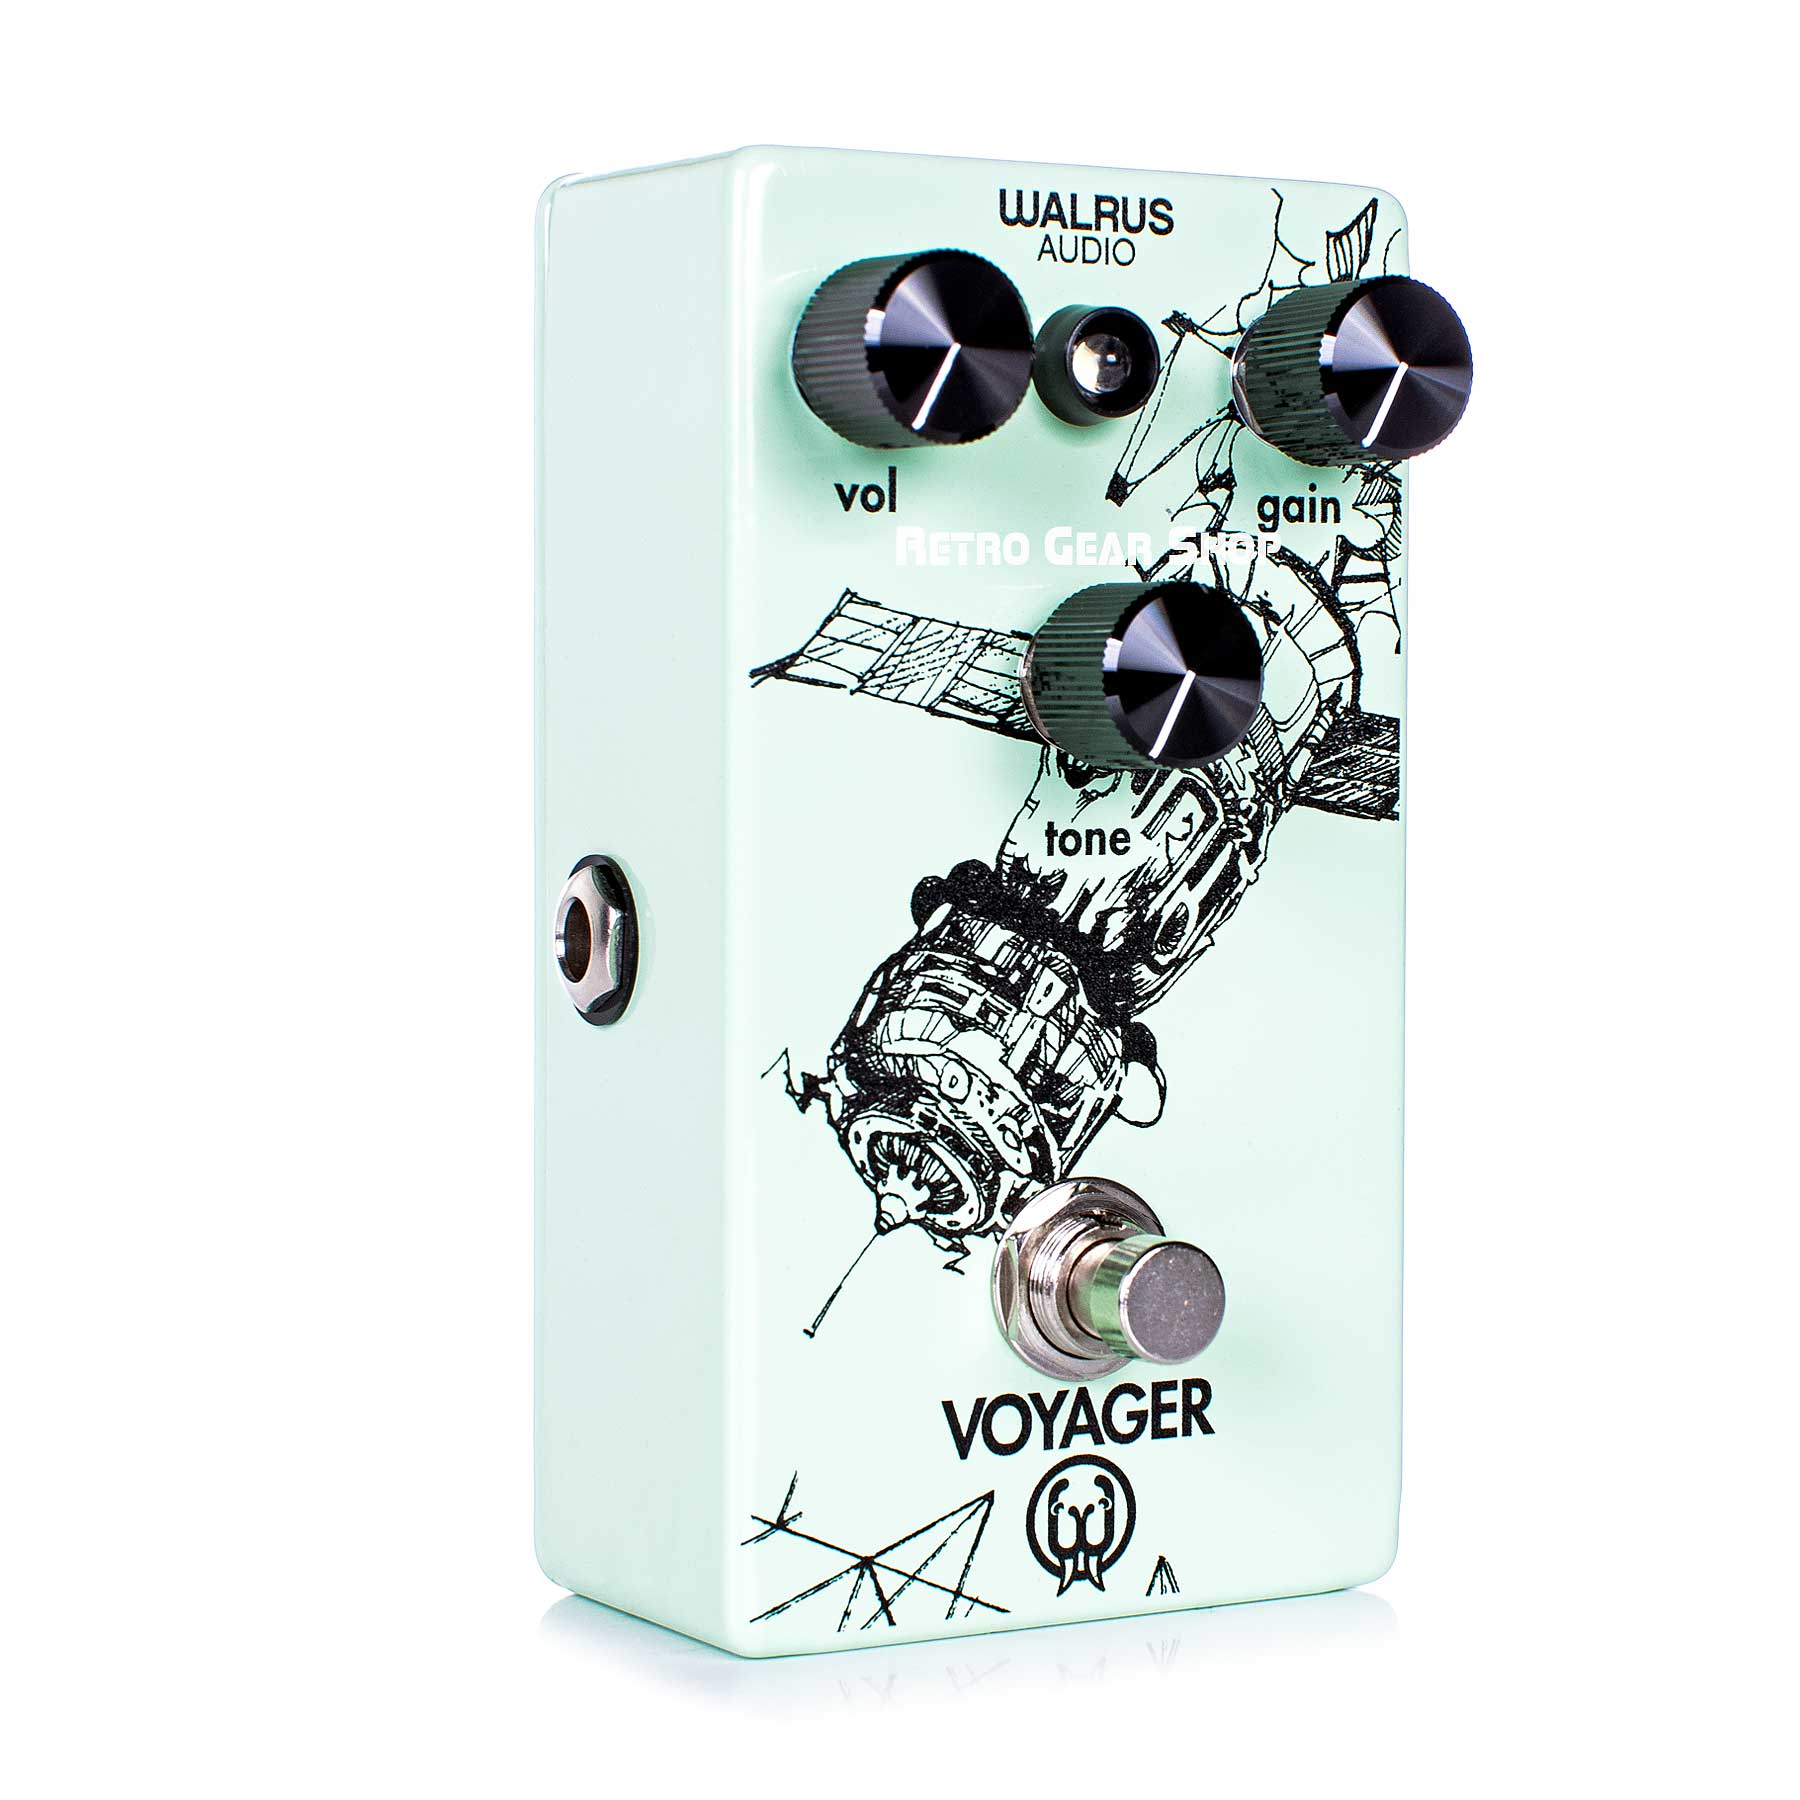 Walrus Audio Voyager Preamp Overdrive Guitar Effect Pedal – Retro